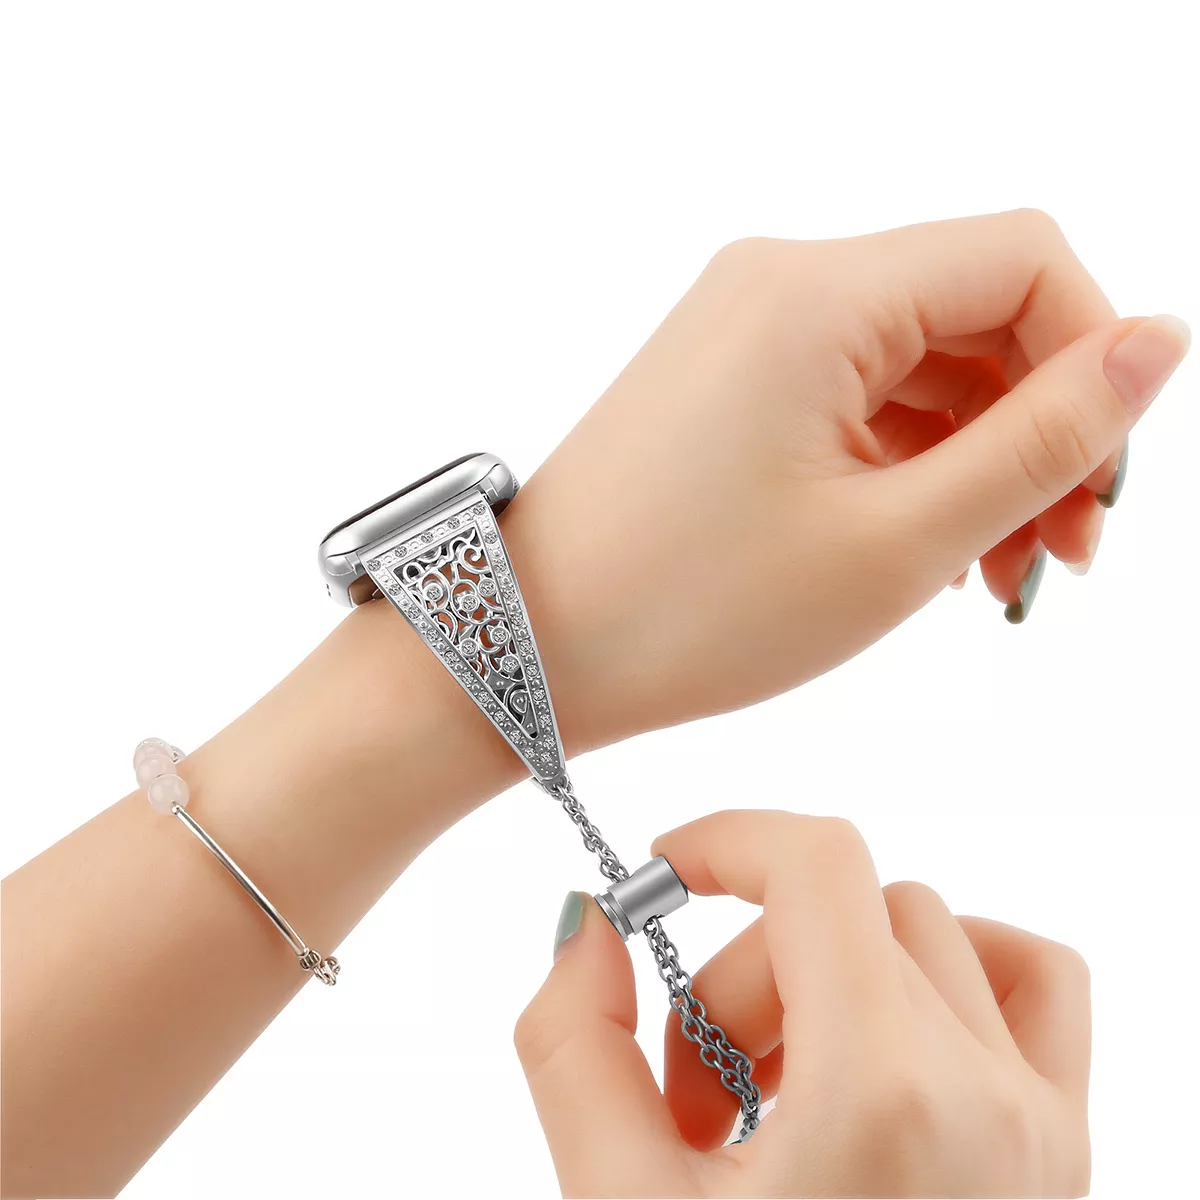 Silver Stainless Bracelet Watchband For Iwatch  - $43.00